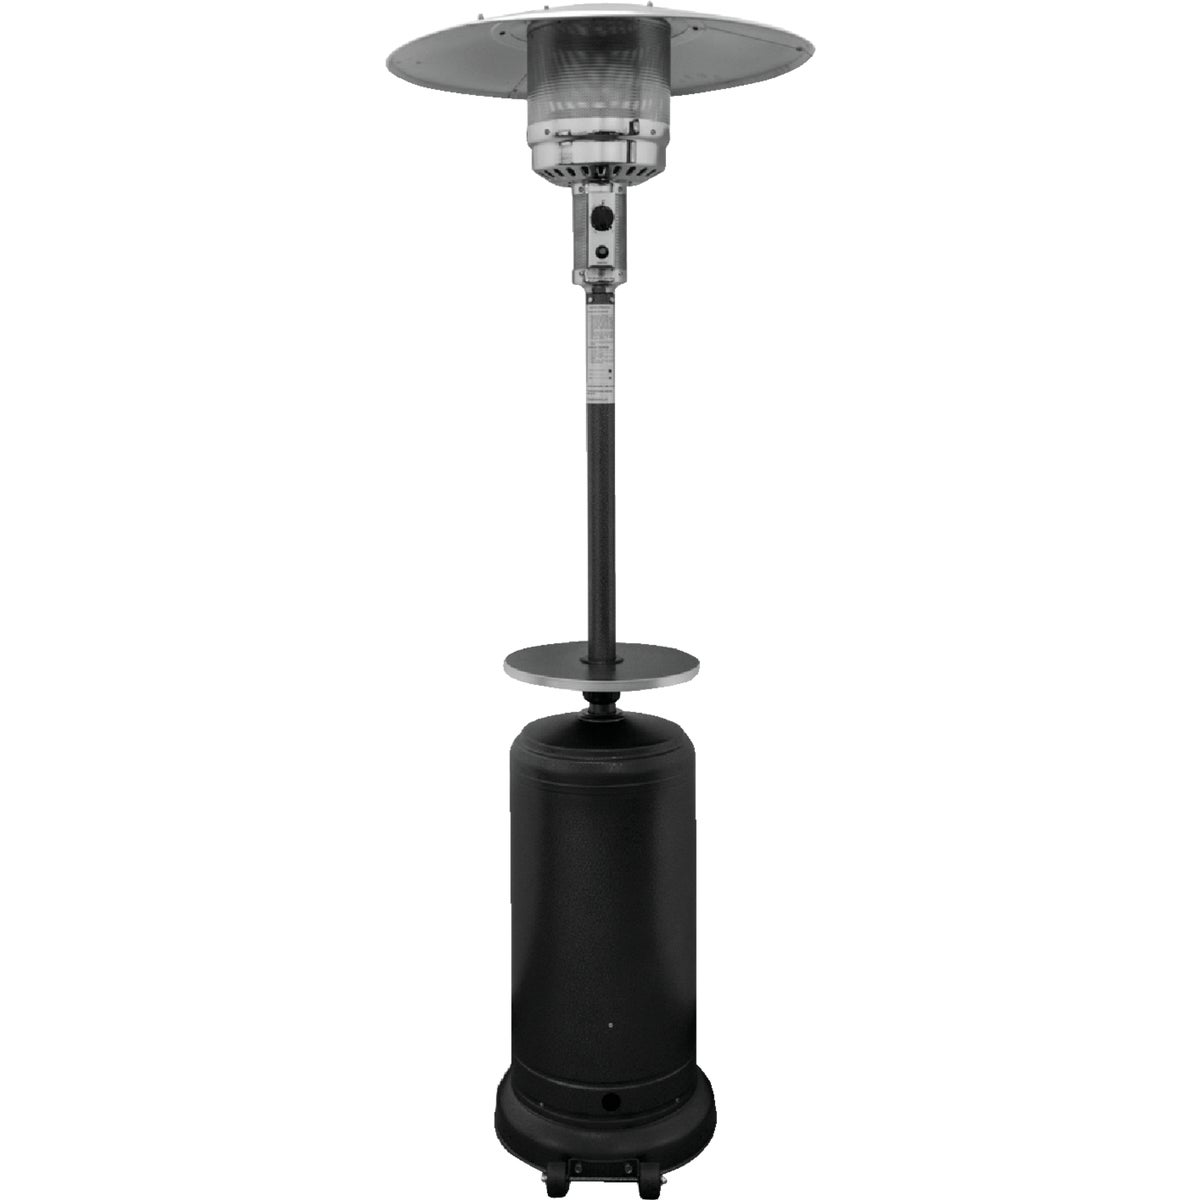 Item 800930, 87 In. tall propane patio heater has a matte black powder coated finish.